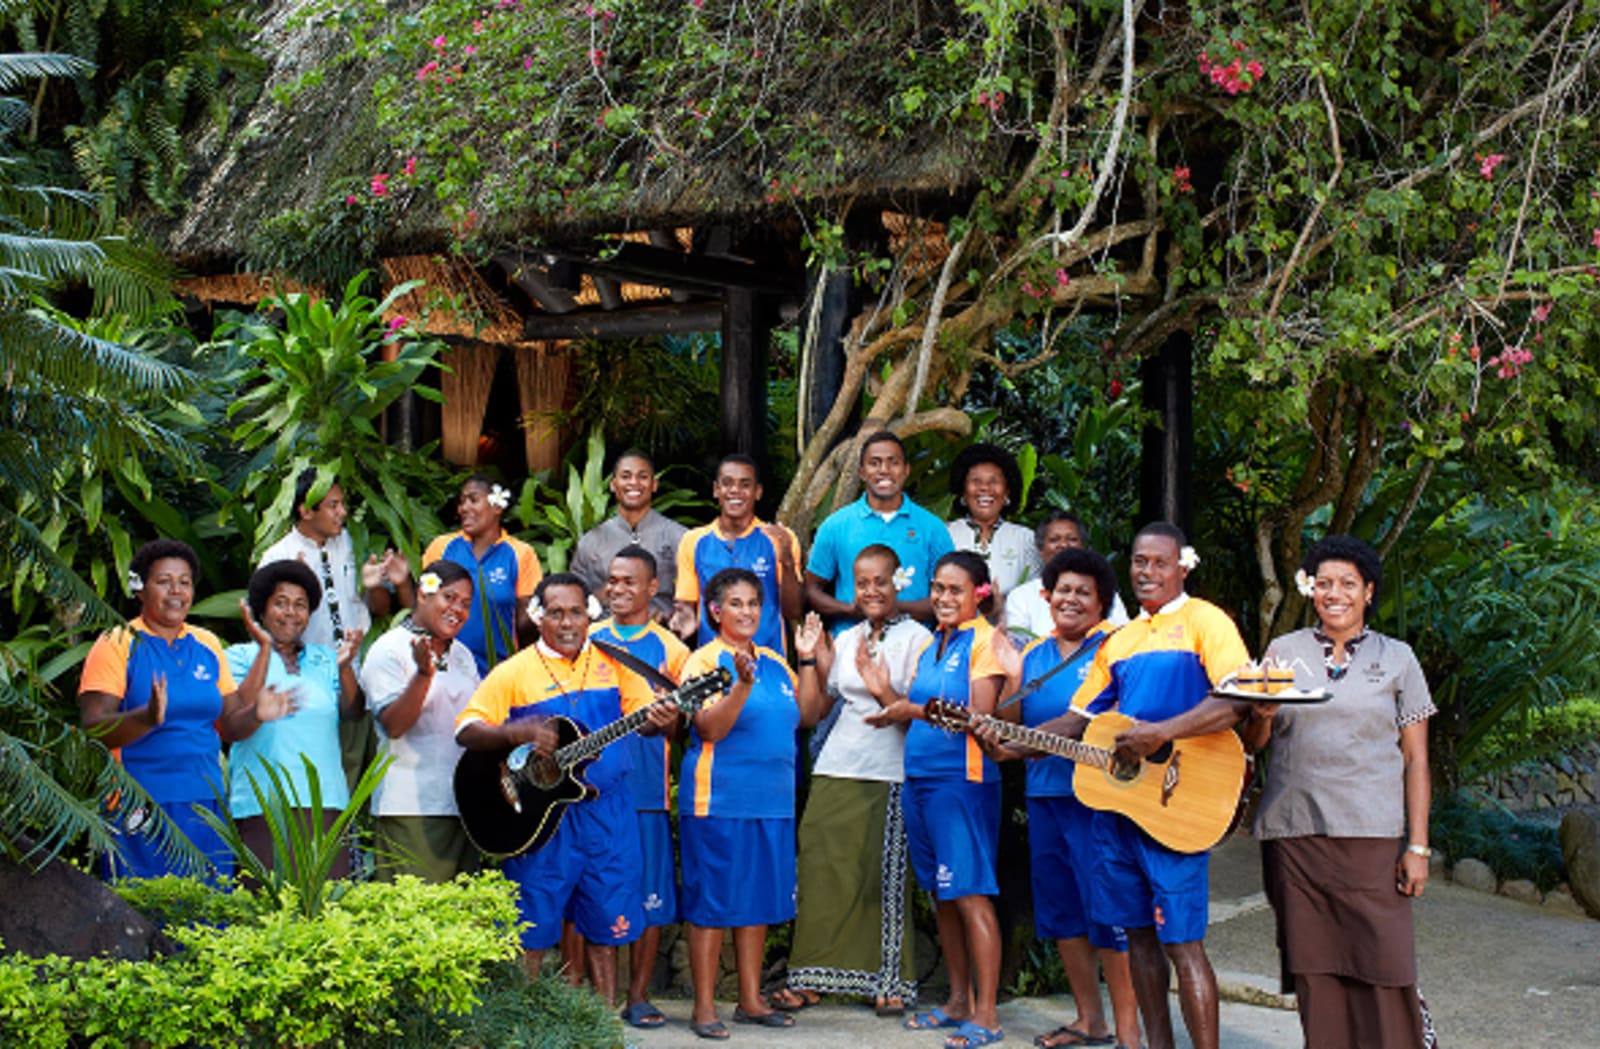  Fiji locals greeting for tourists with drinks and music